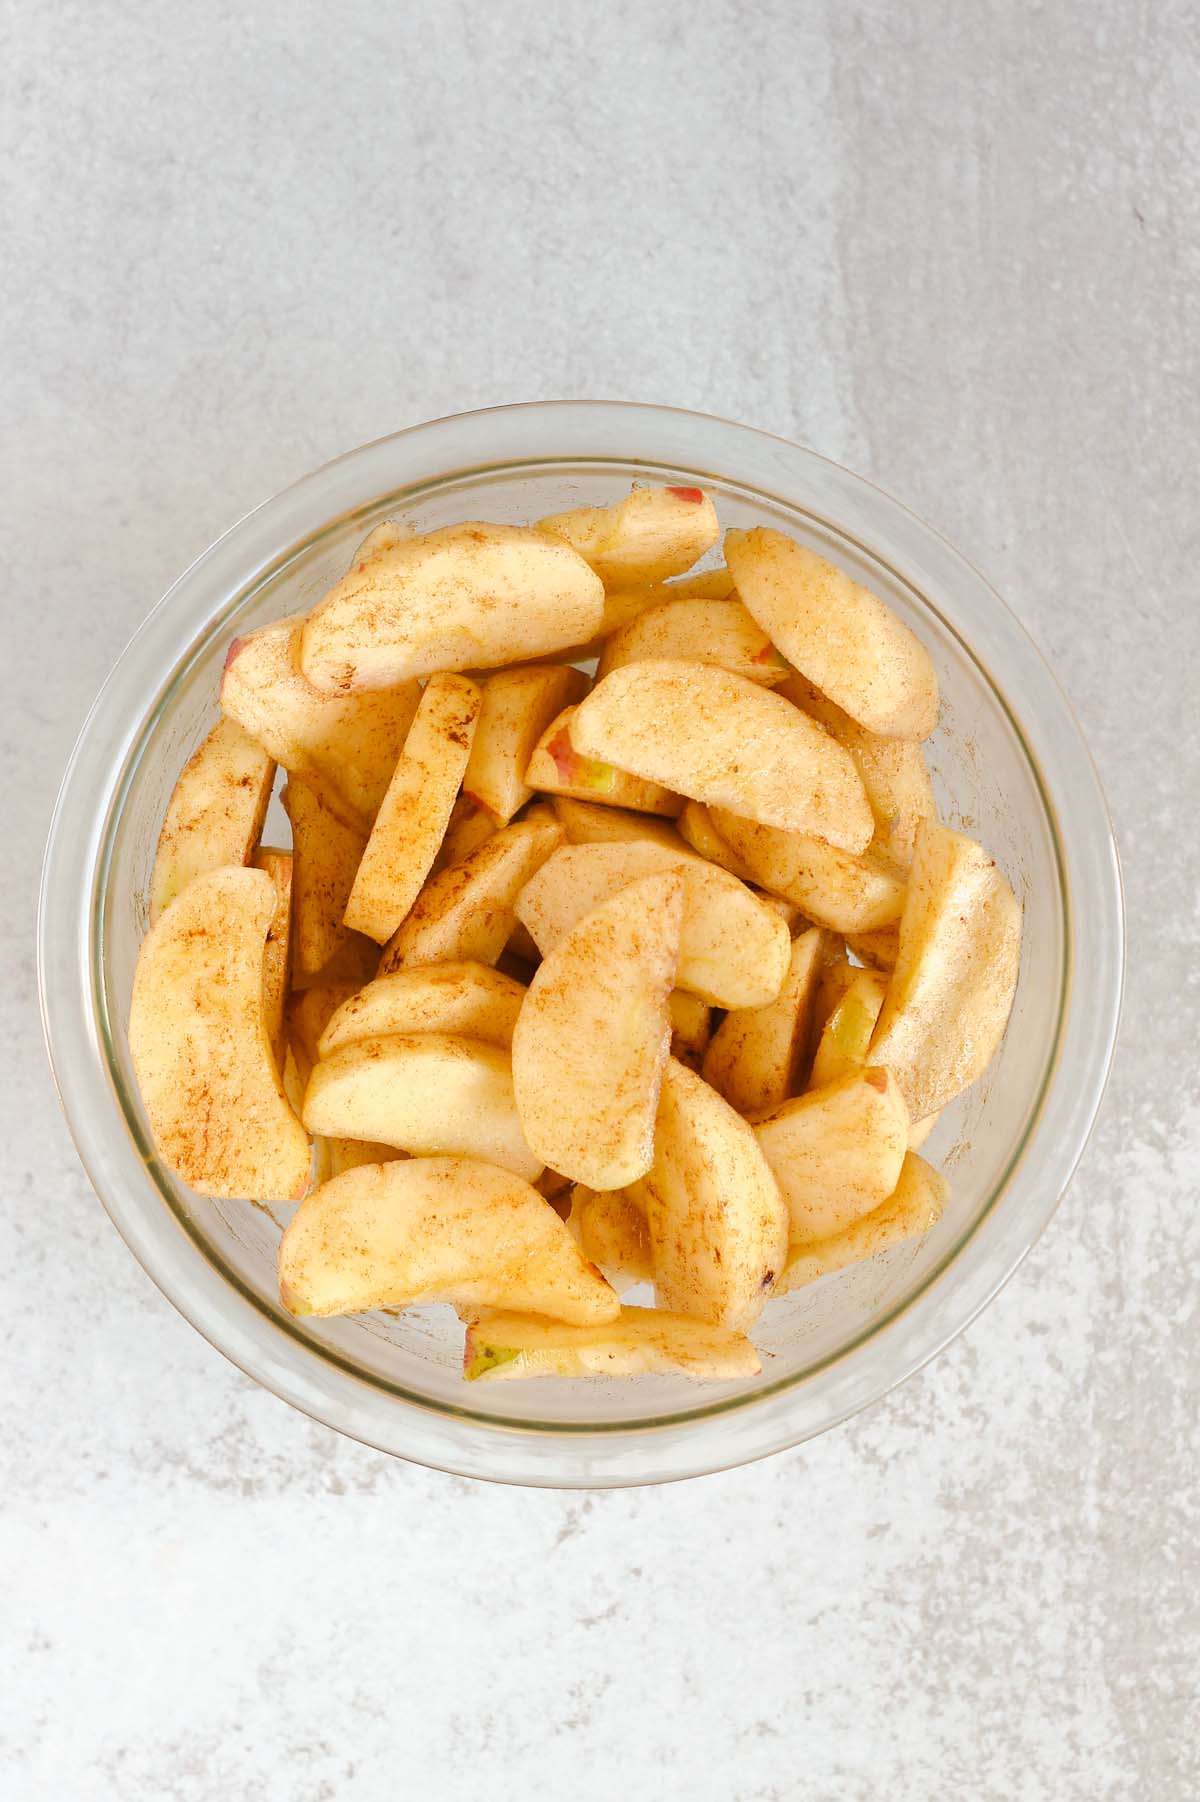 Apple slices mixed with cinnamon in a glass mixing bowl.